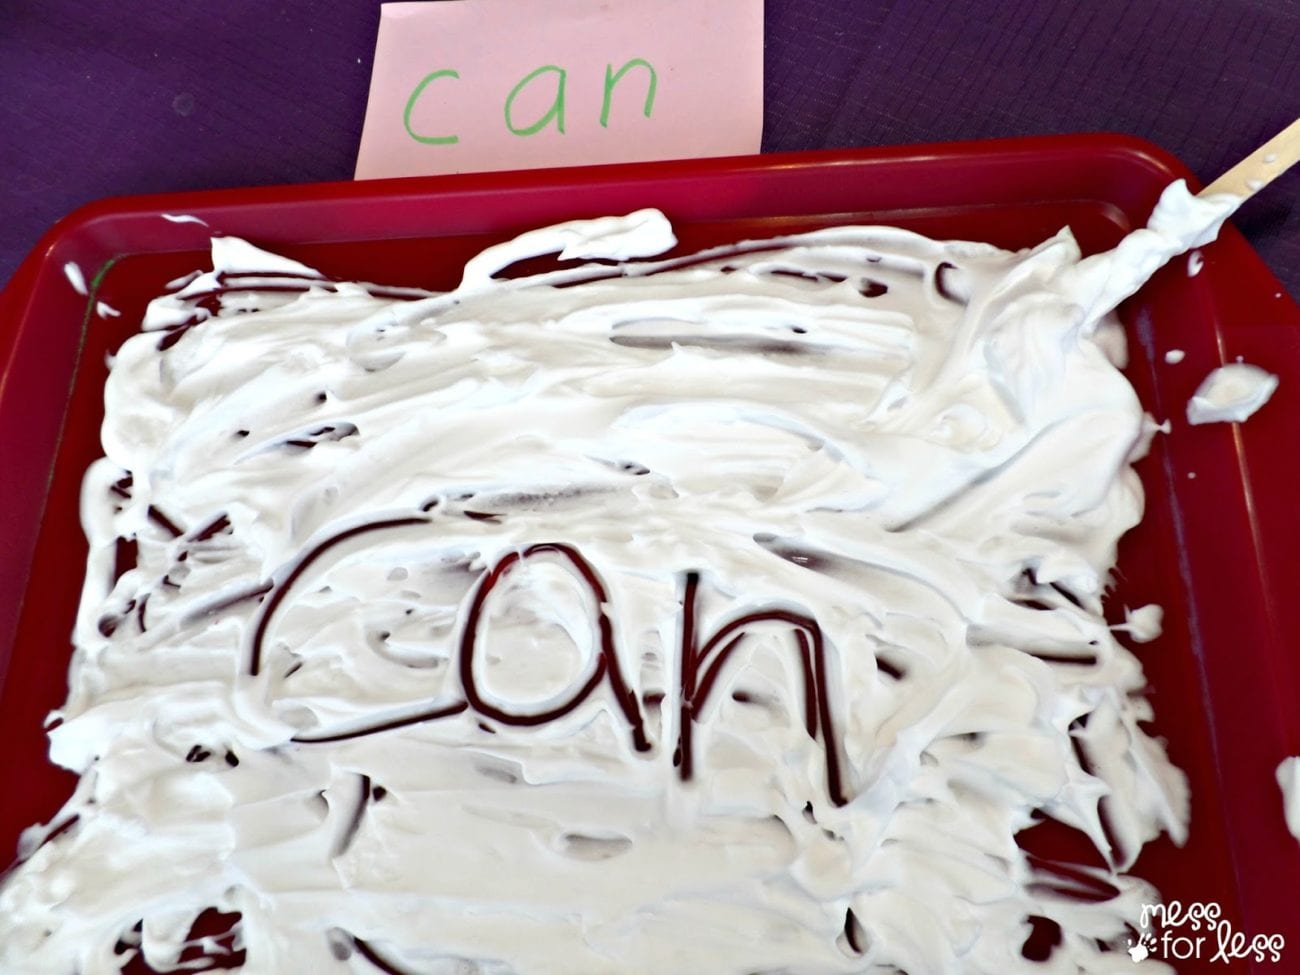 A tray of shaving cream with the word "can" written in the middle